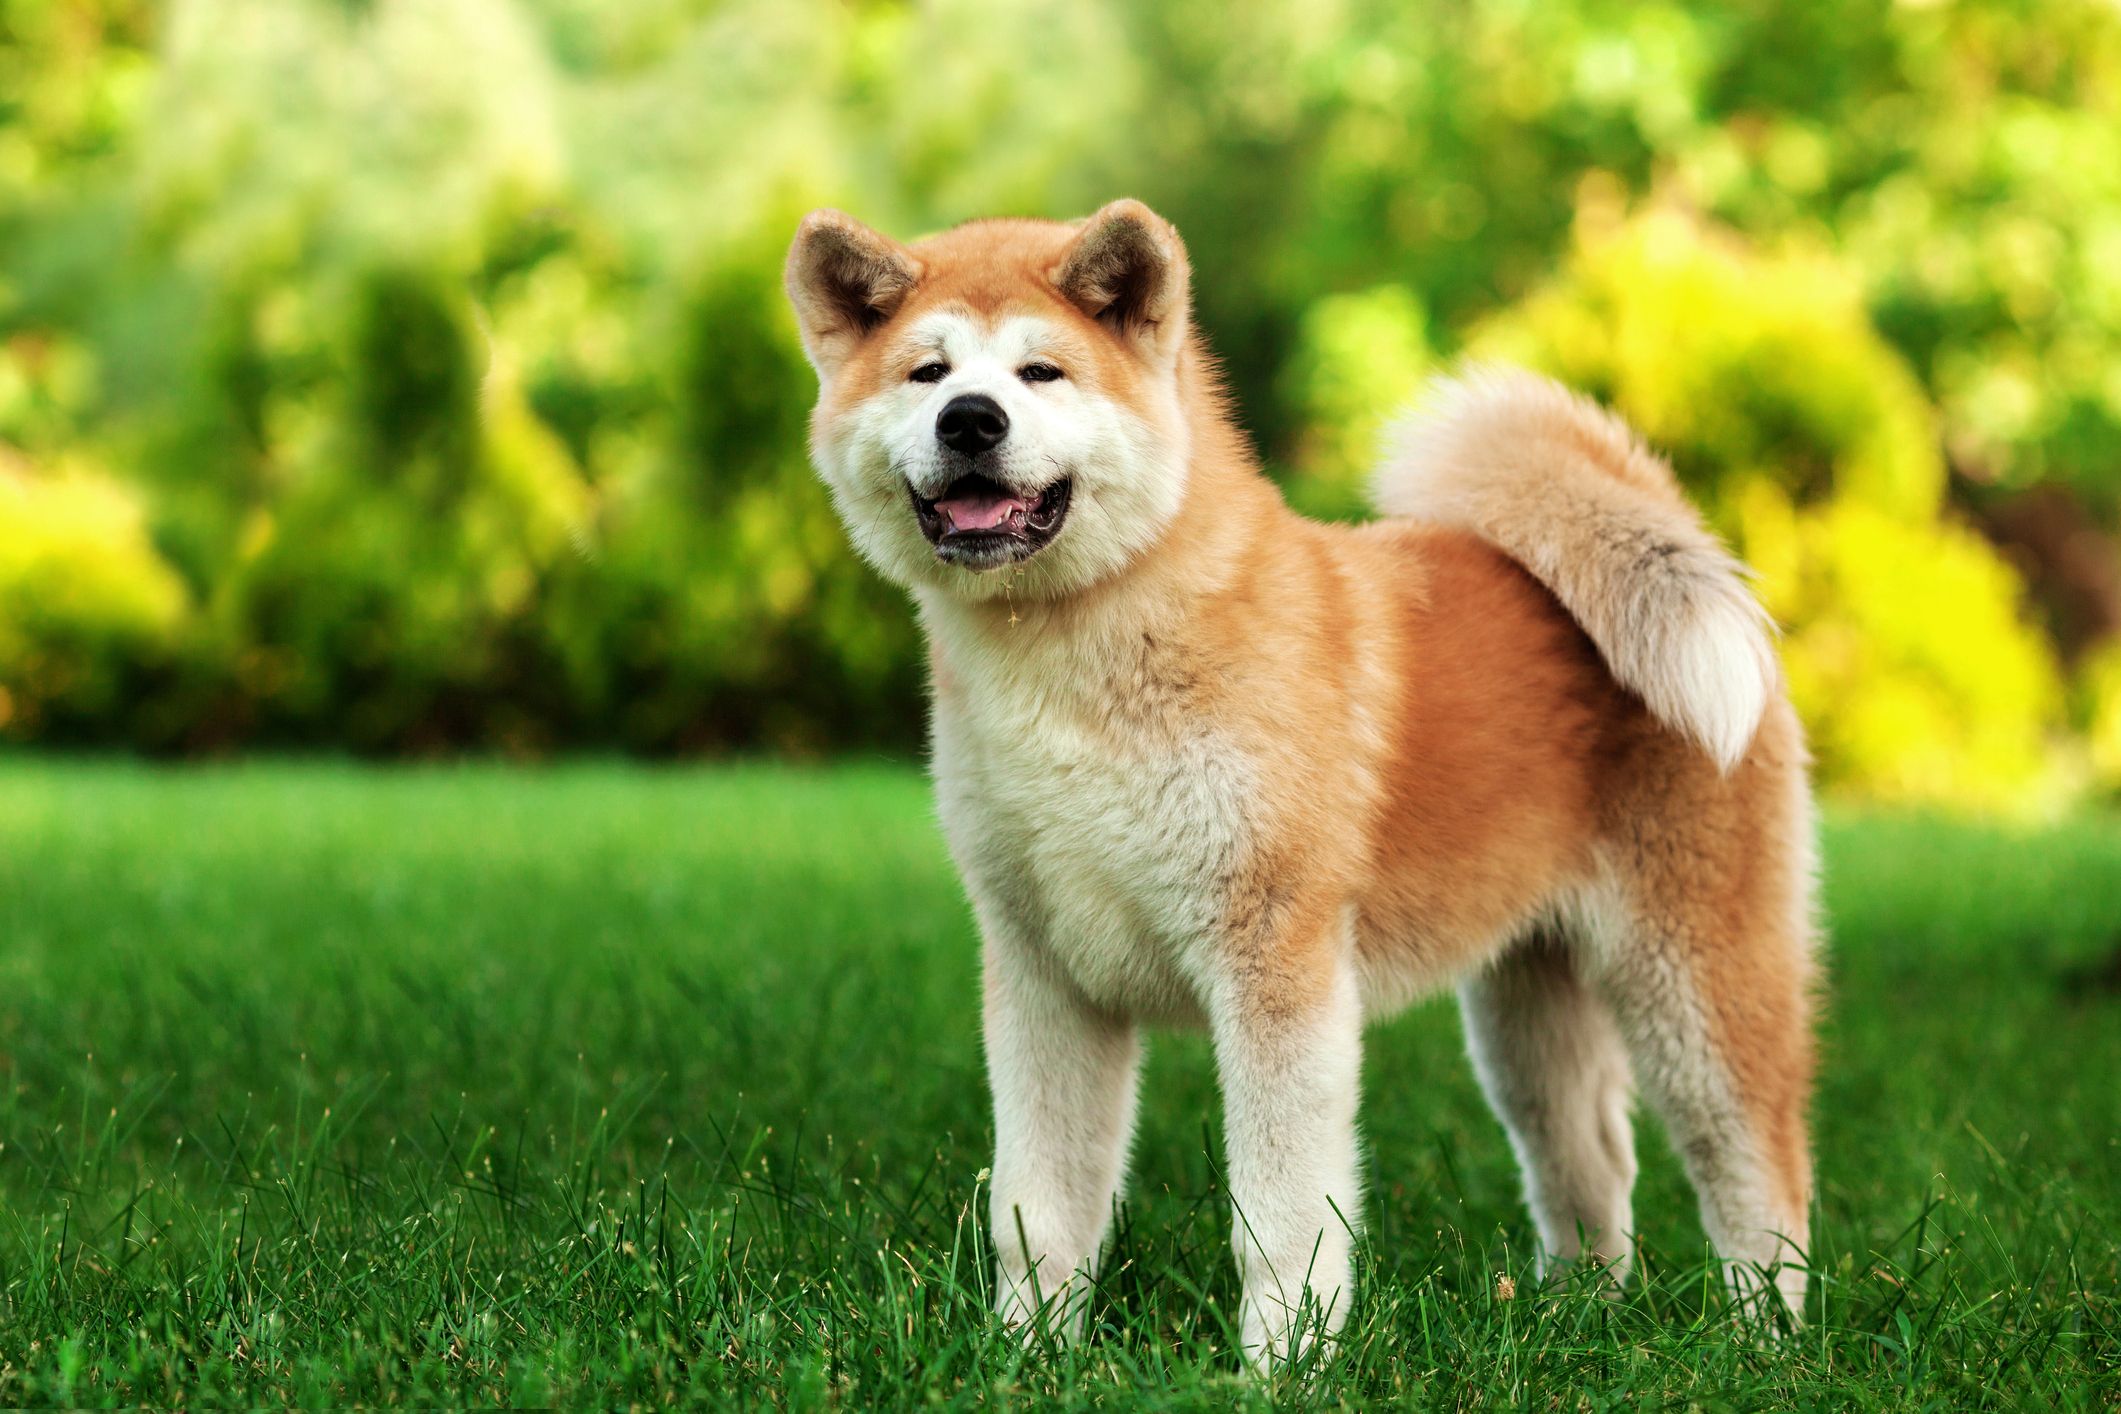 500+ Unique Japanese Dog Names with Meanings in 2020 – Best Dog's Names